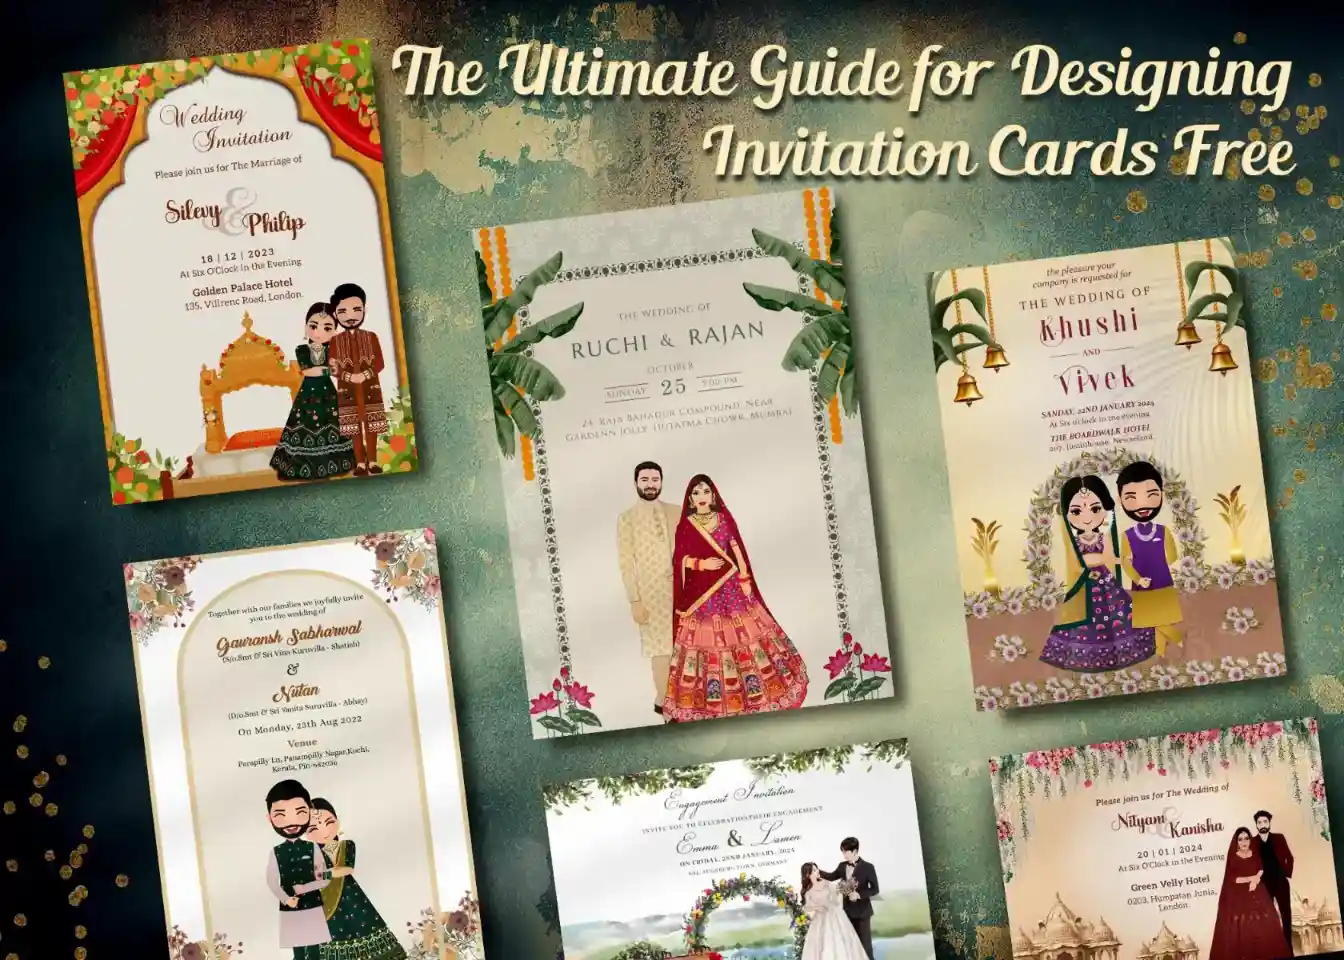 The Ultimate Guide for Designing Invitation Cards Free